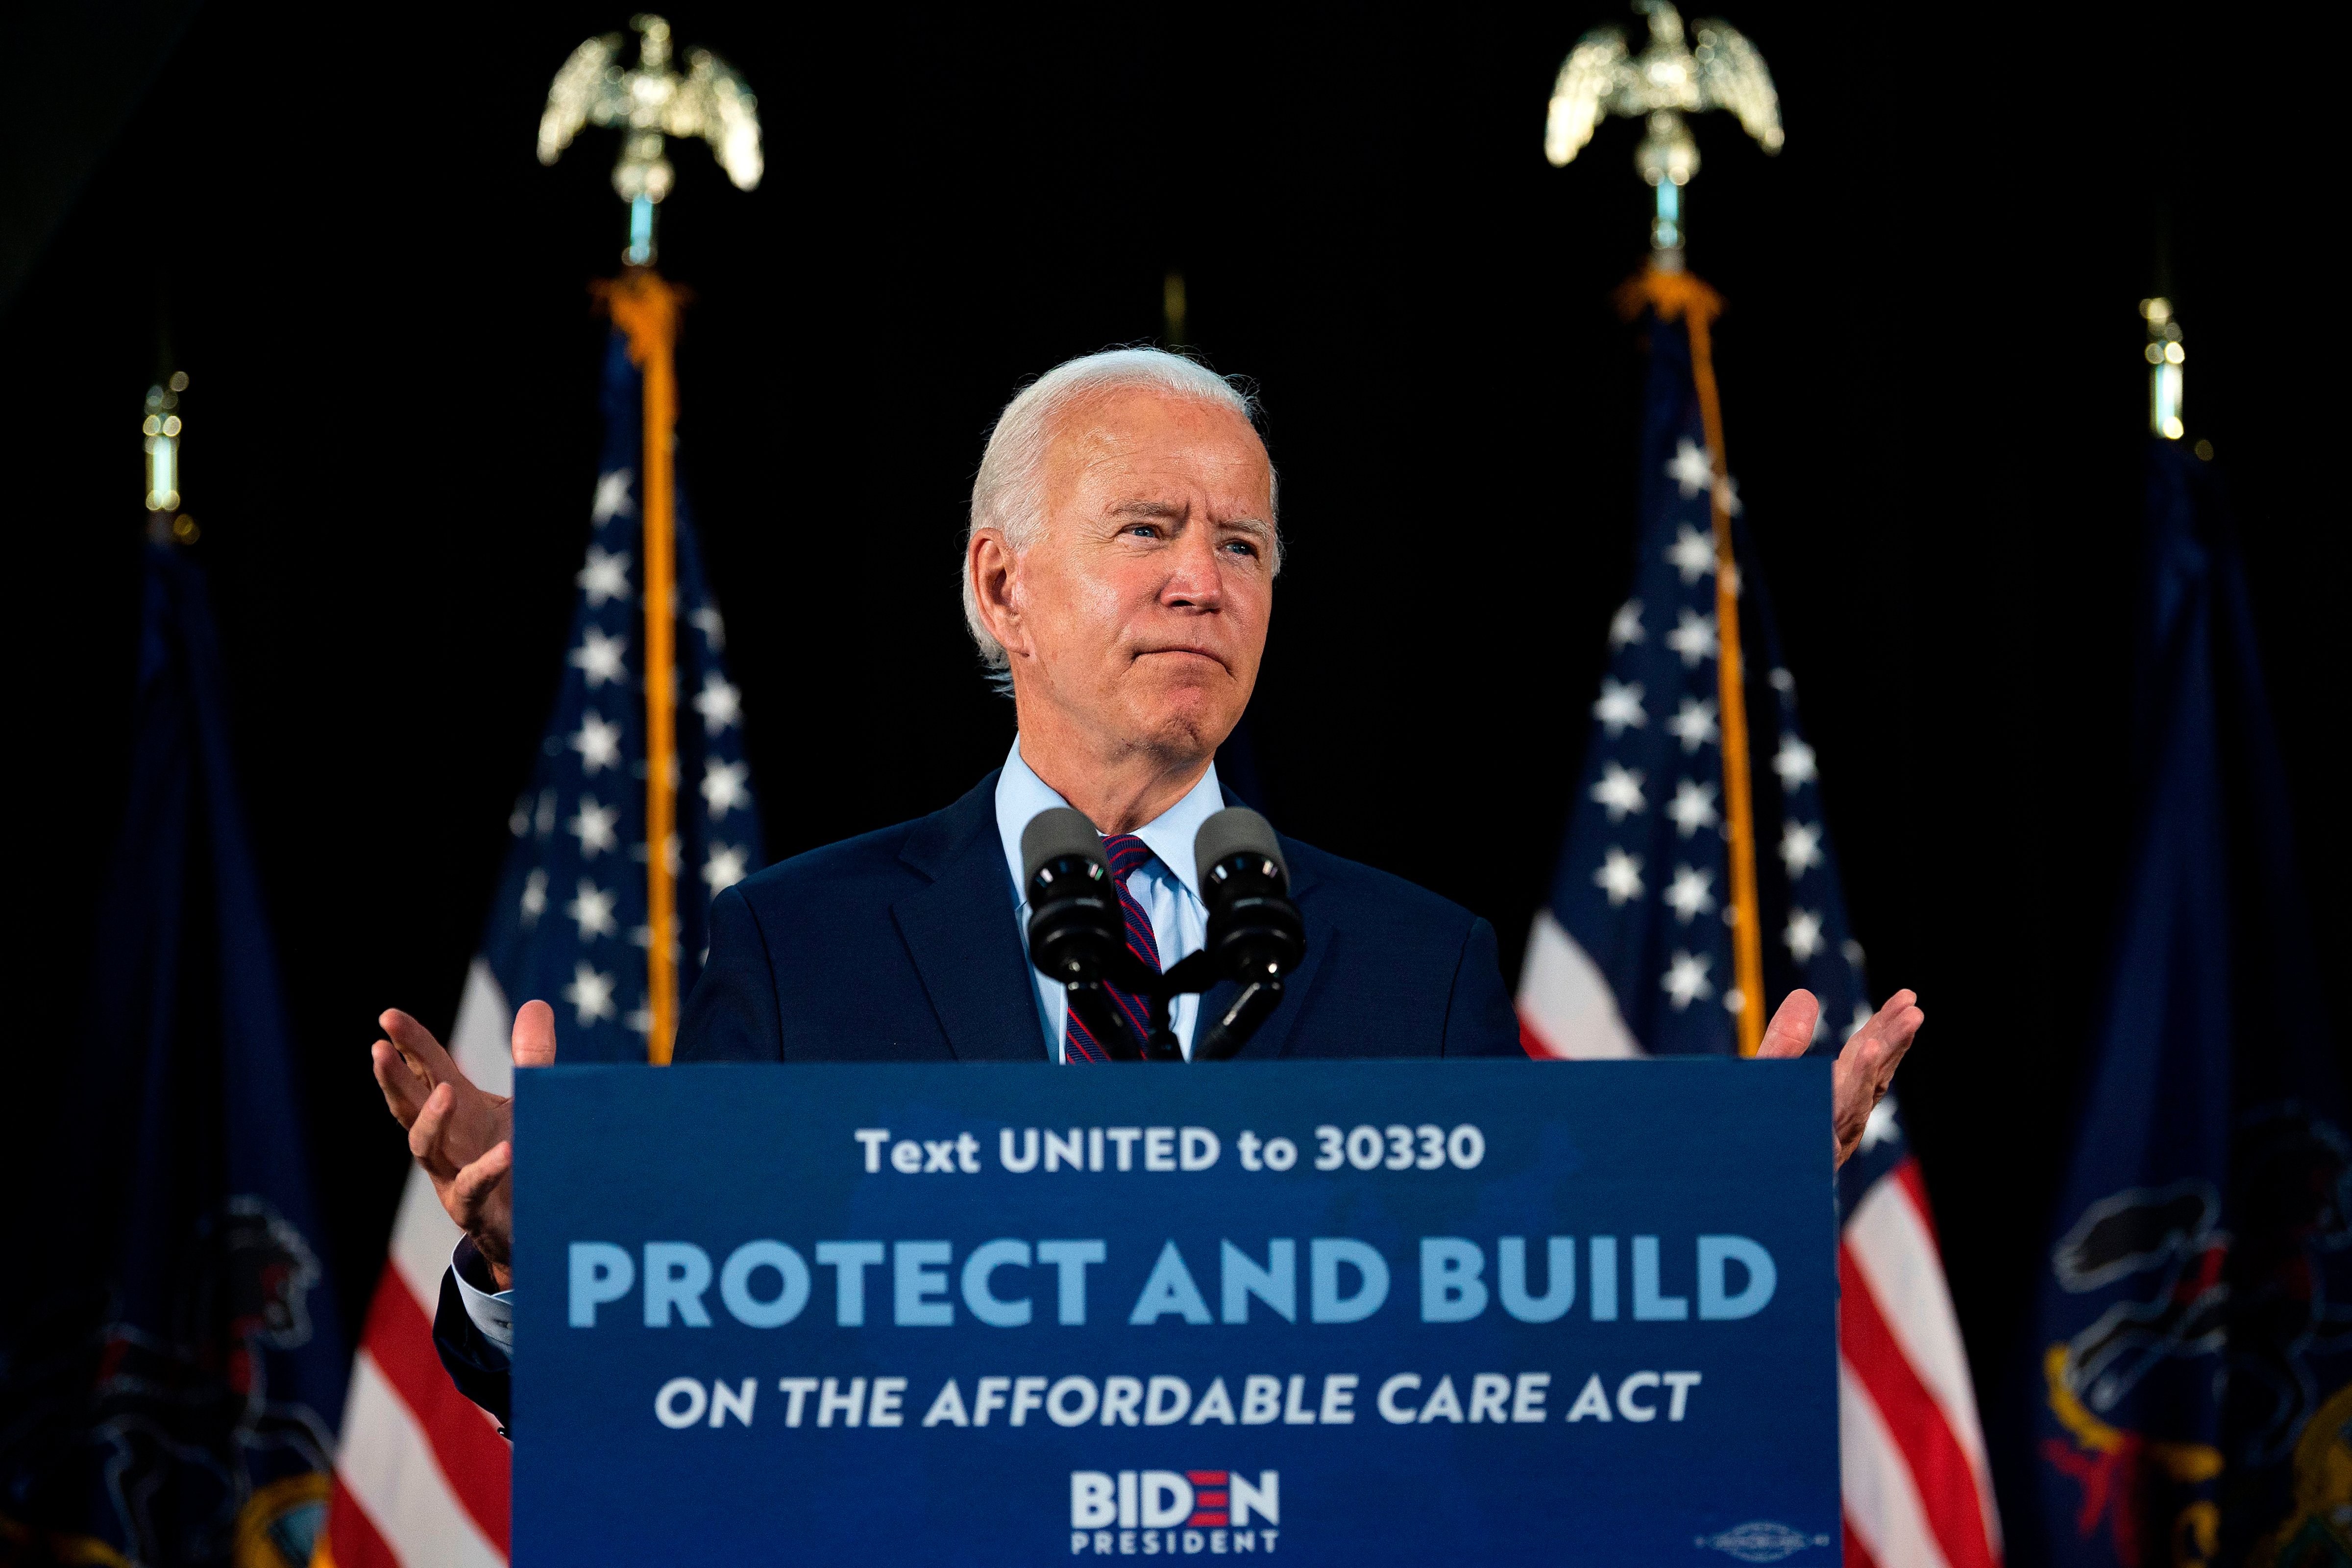 Democratic presidential candidate Joe Biden delivers remarks after meeting with Pennsylvania families who have benefited from the Affordable Care Act on June 25, 2020 in Lancaster, Pennsylvania. (Jim Watson—AFP/Getty Images)